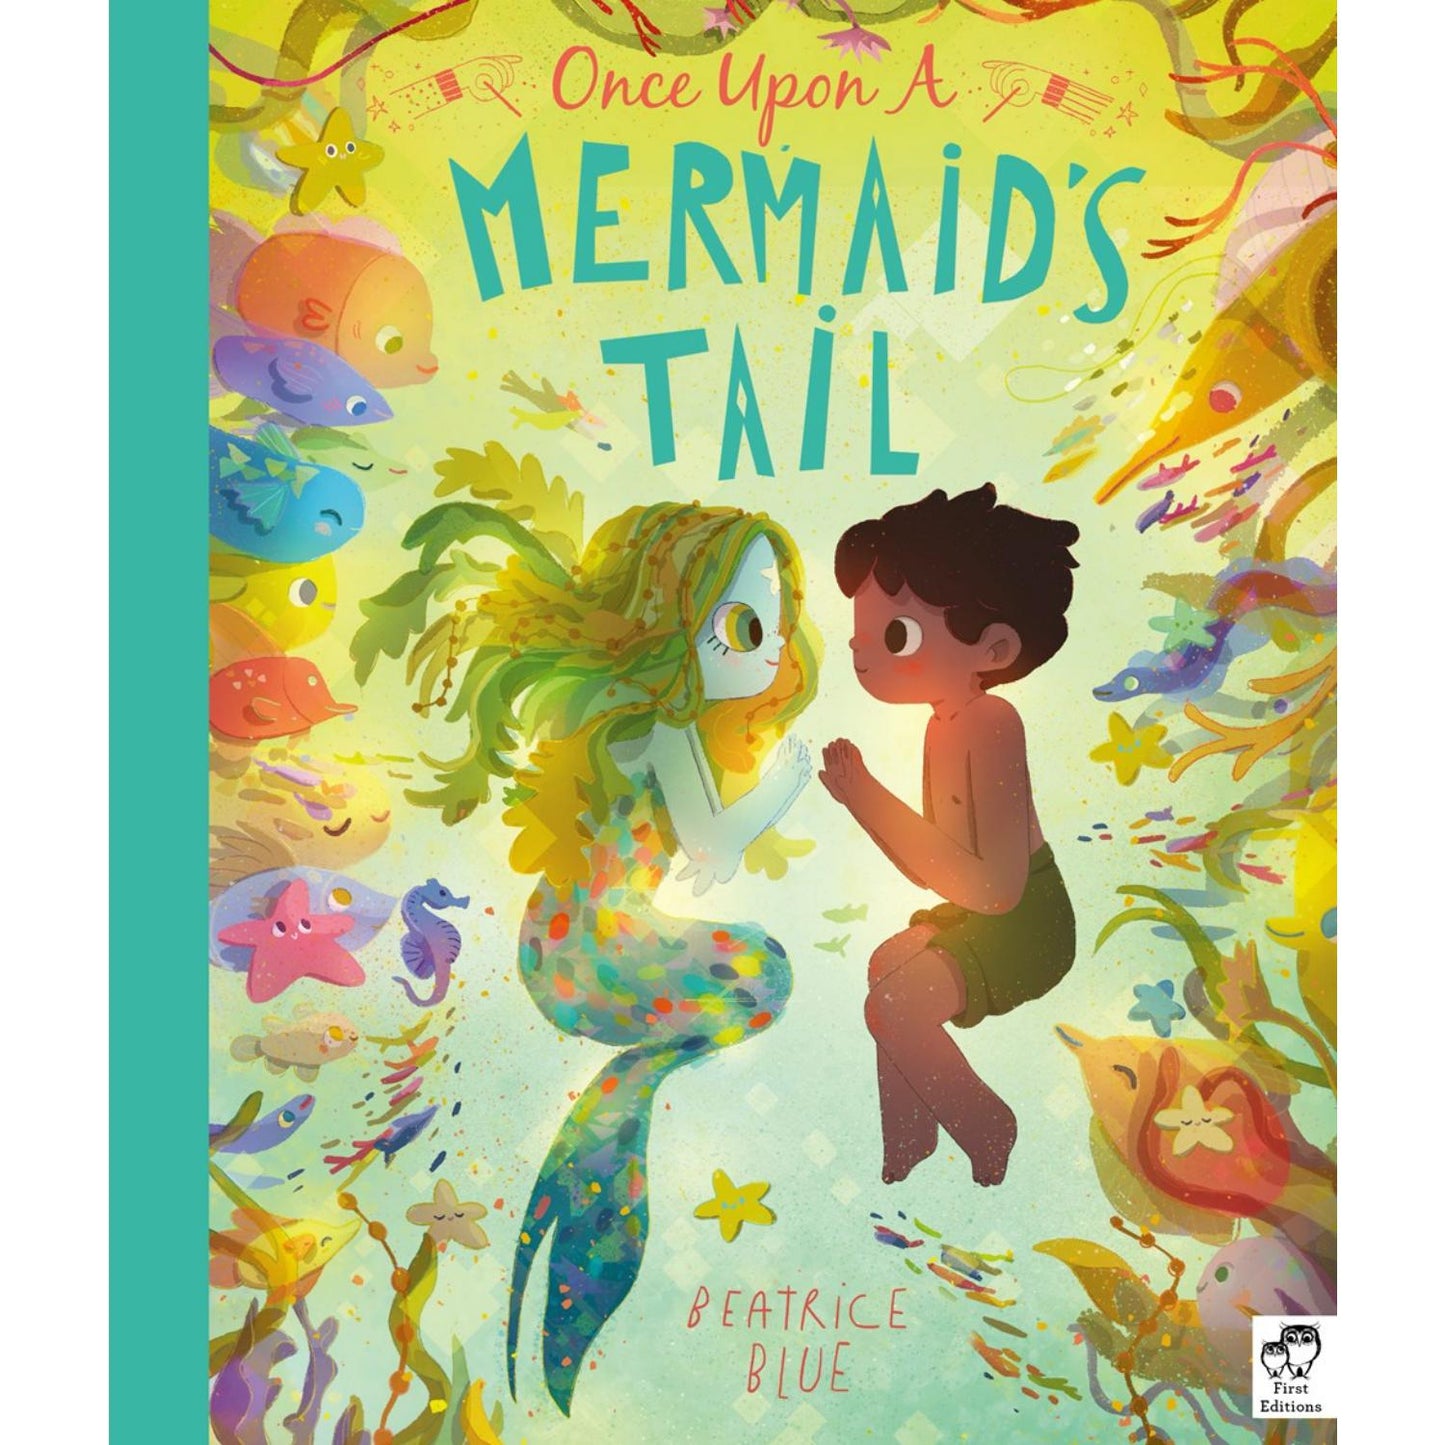 Once Upon a Mermaid's Tail | Children’s Book on Friendship & Nature